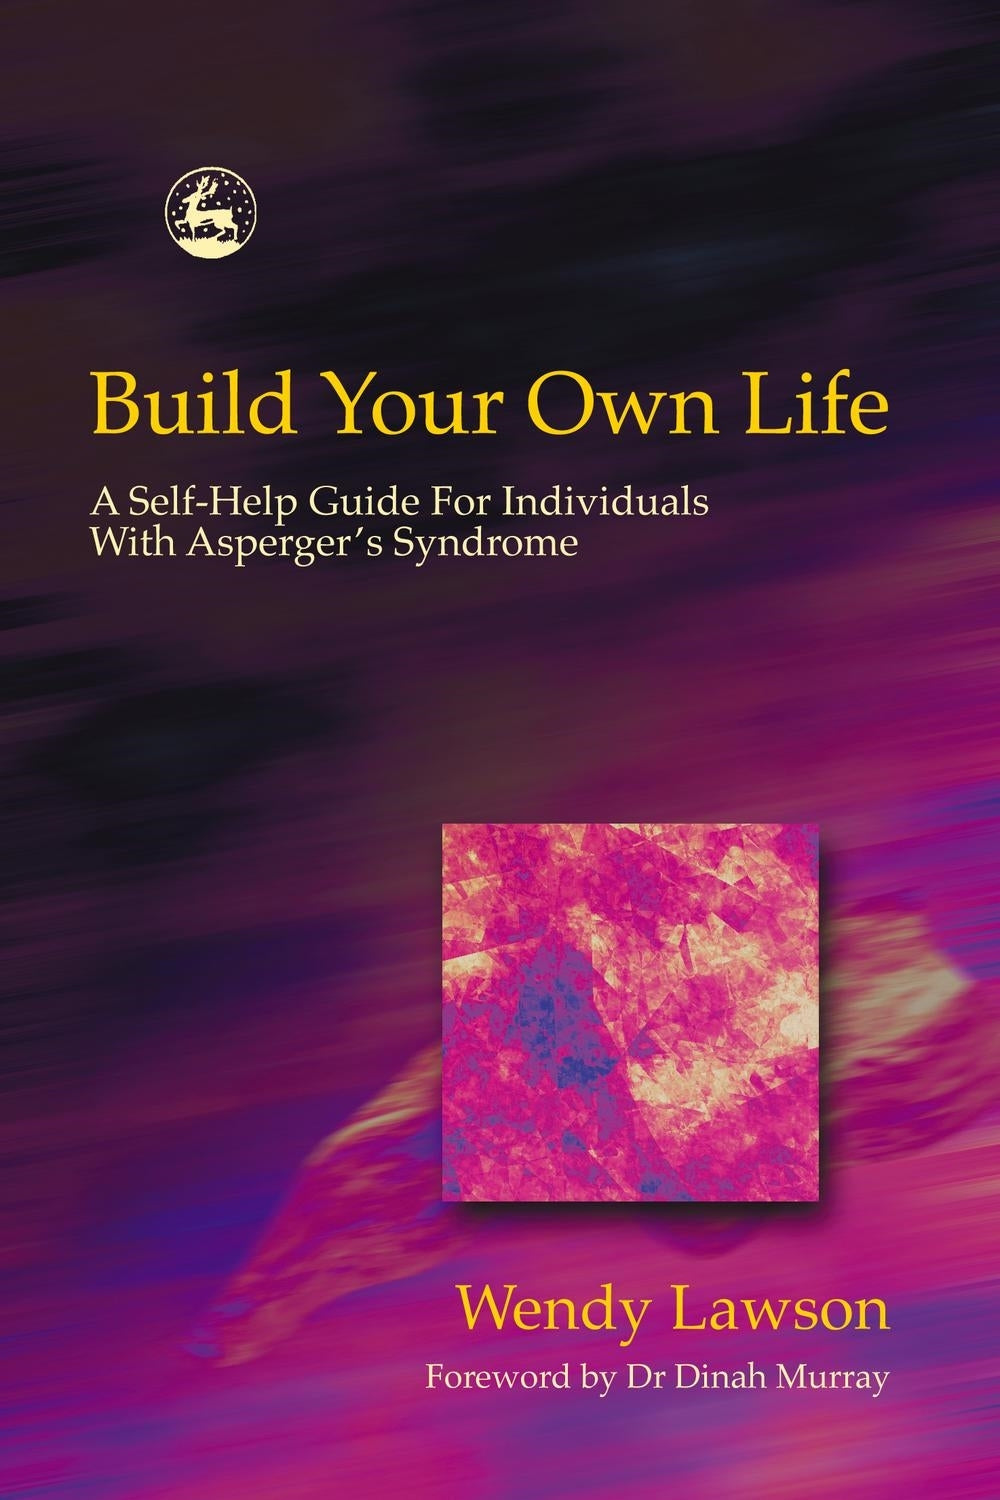 Build Your Own Life by Wendy Lawson